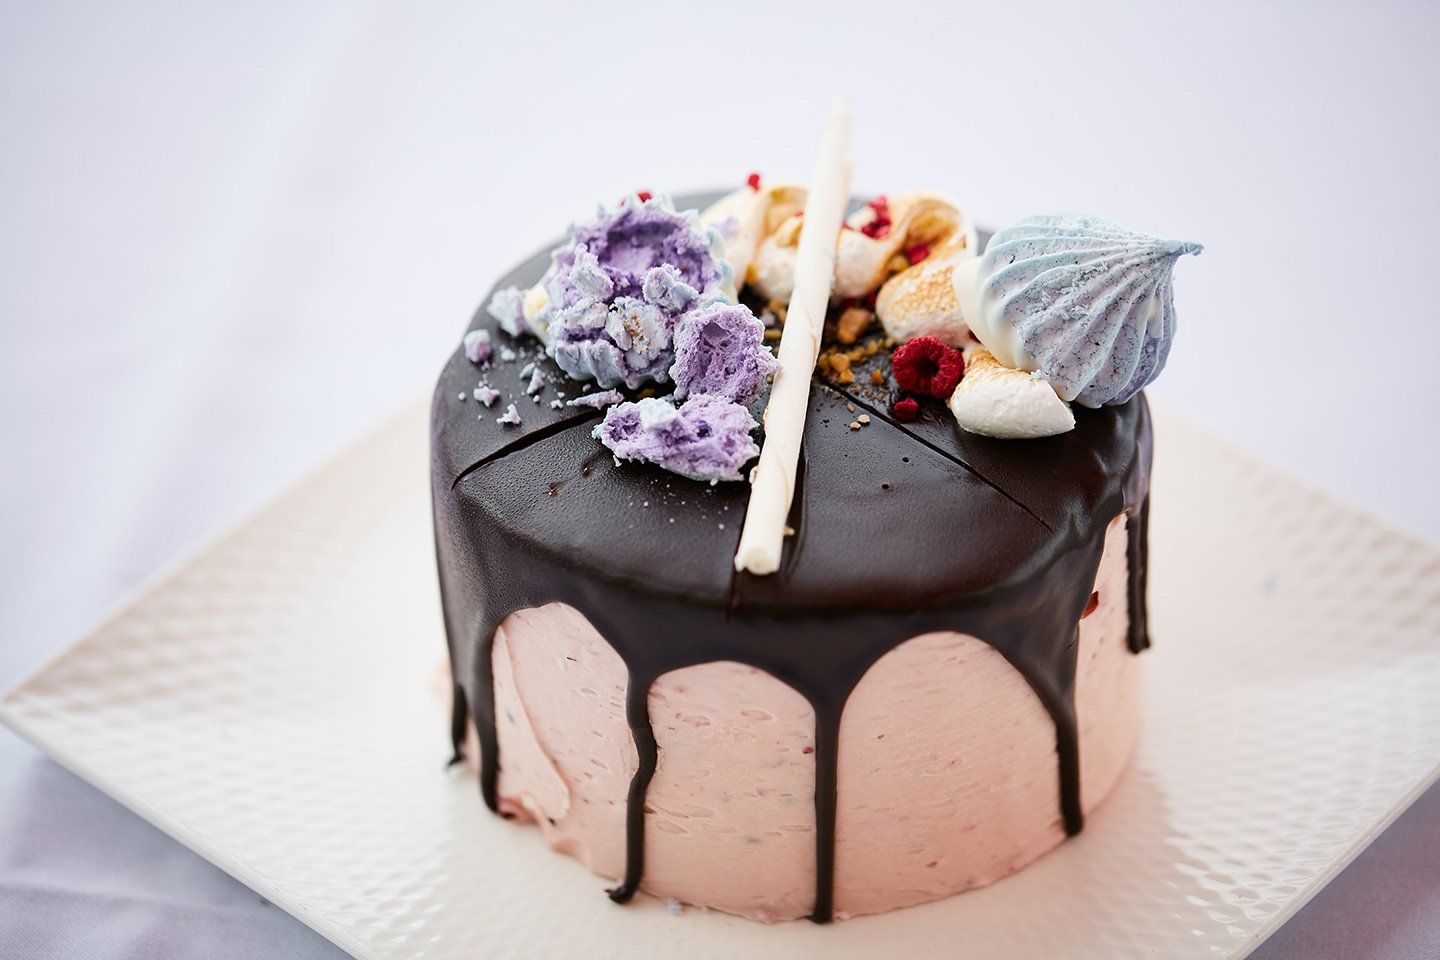 A cake with chocolate icing and flowers on it is on a white plate.